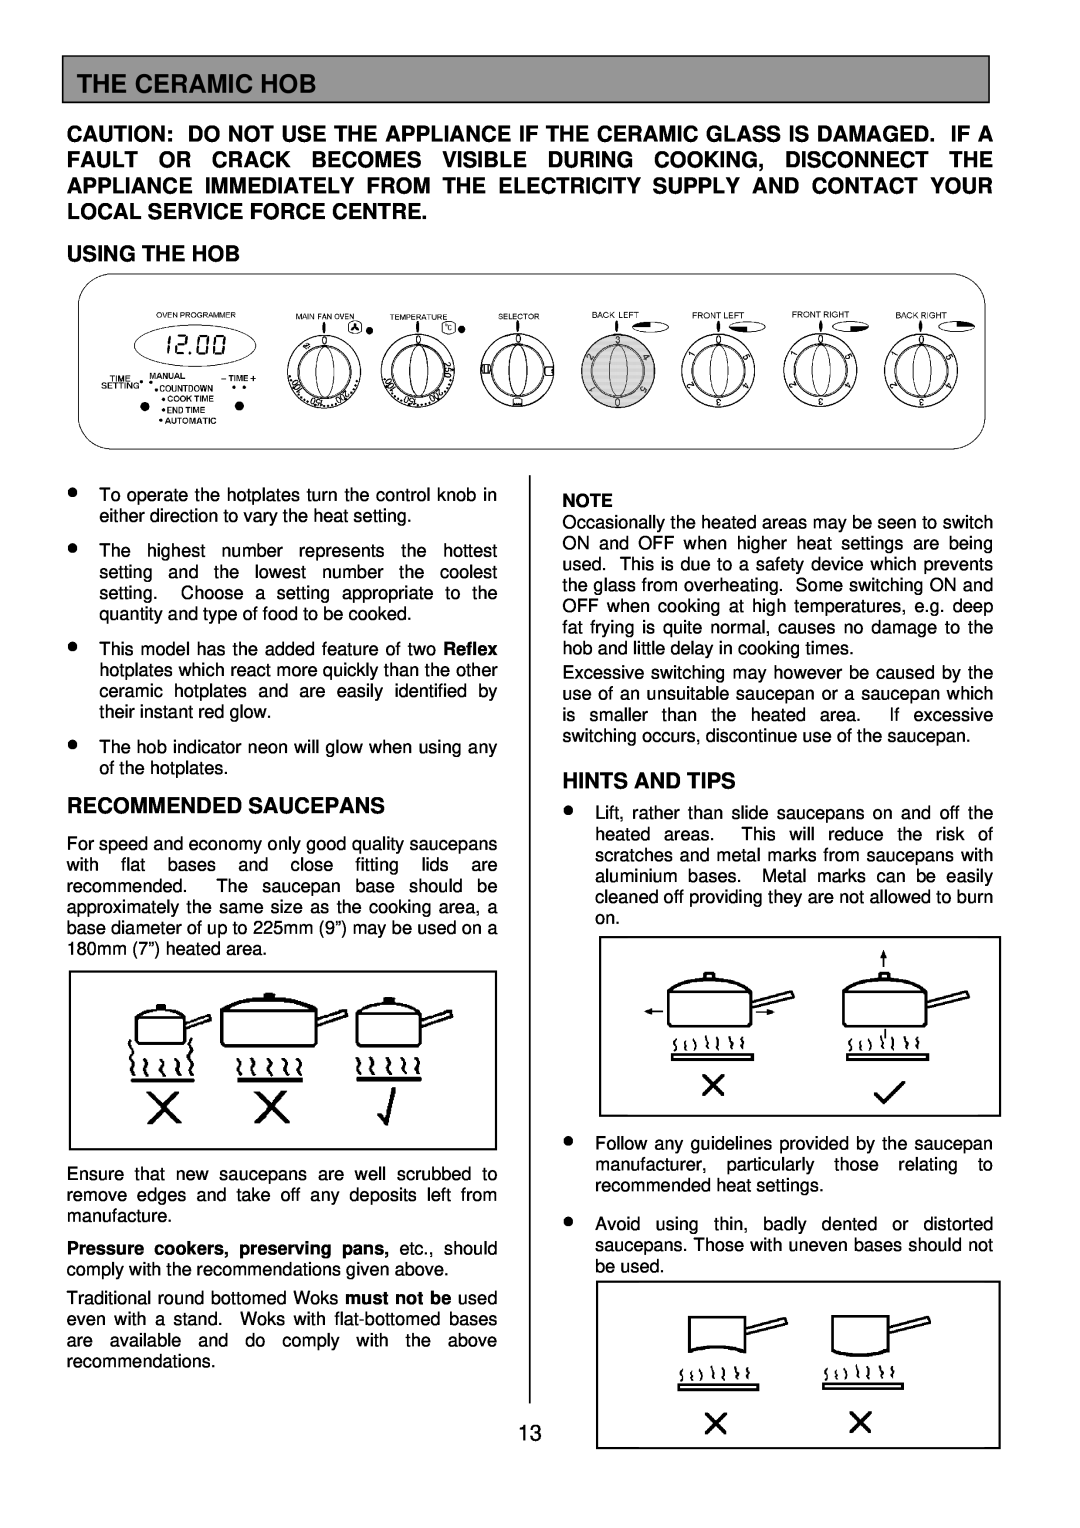 Tricity Bendix SB462 installation instructions The Ceramic Hob, Using The Hob, Recommended Saucepans, Hints And Tips 